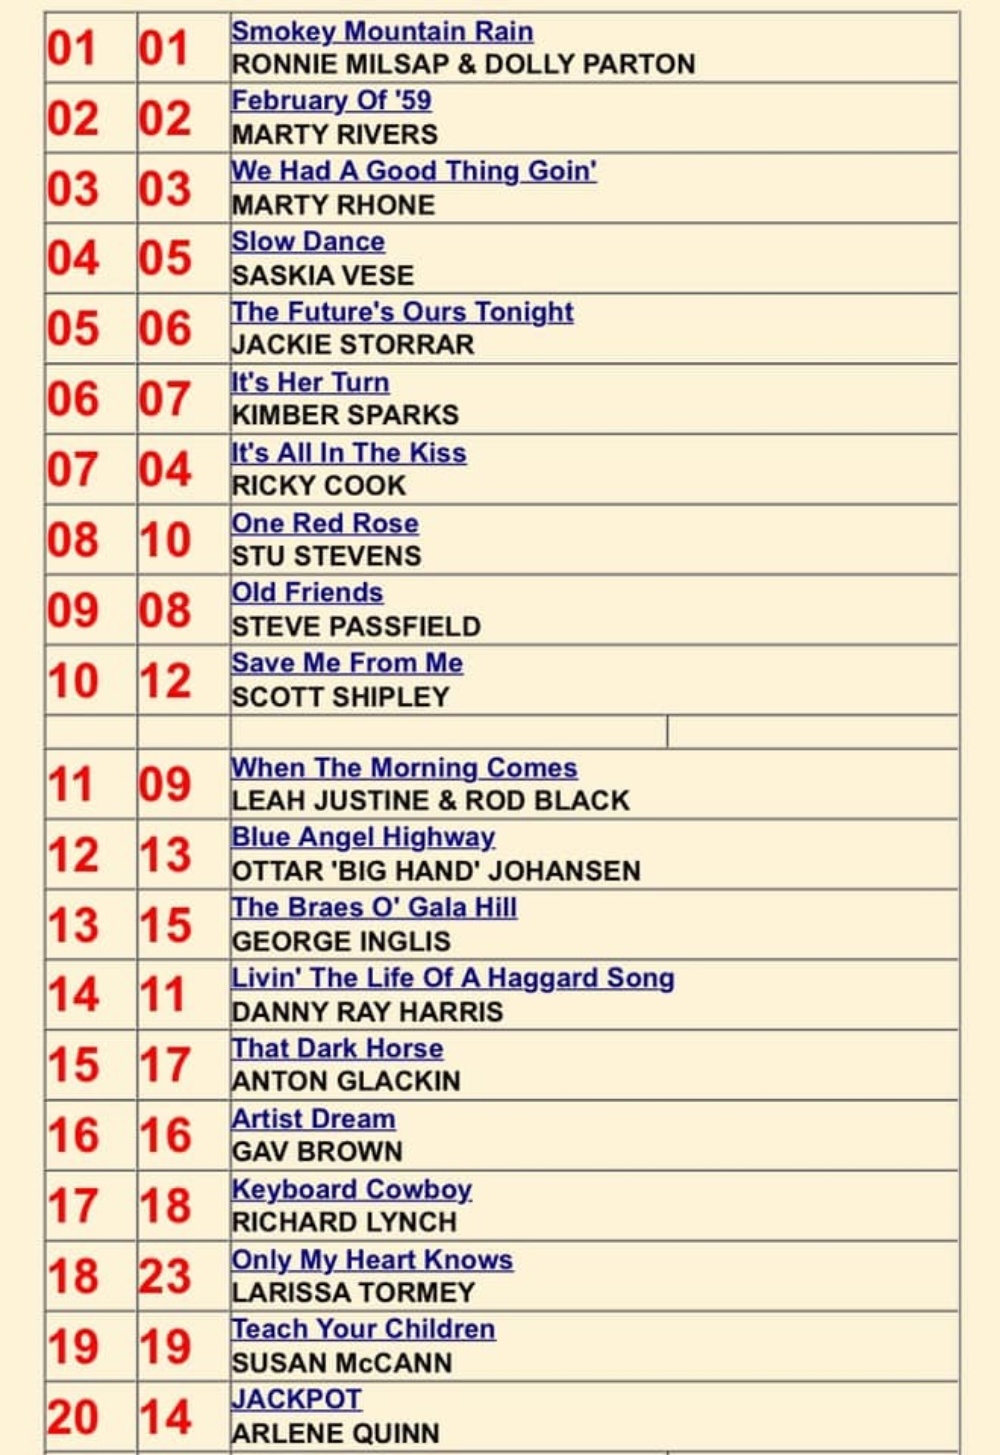 19/5/2019 Artist Dream from the Sound Circus Album at number 16 in the Hotdisc tv Top 40 Chart in the UK